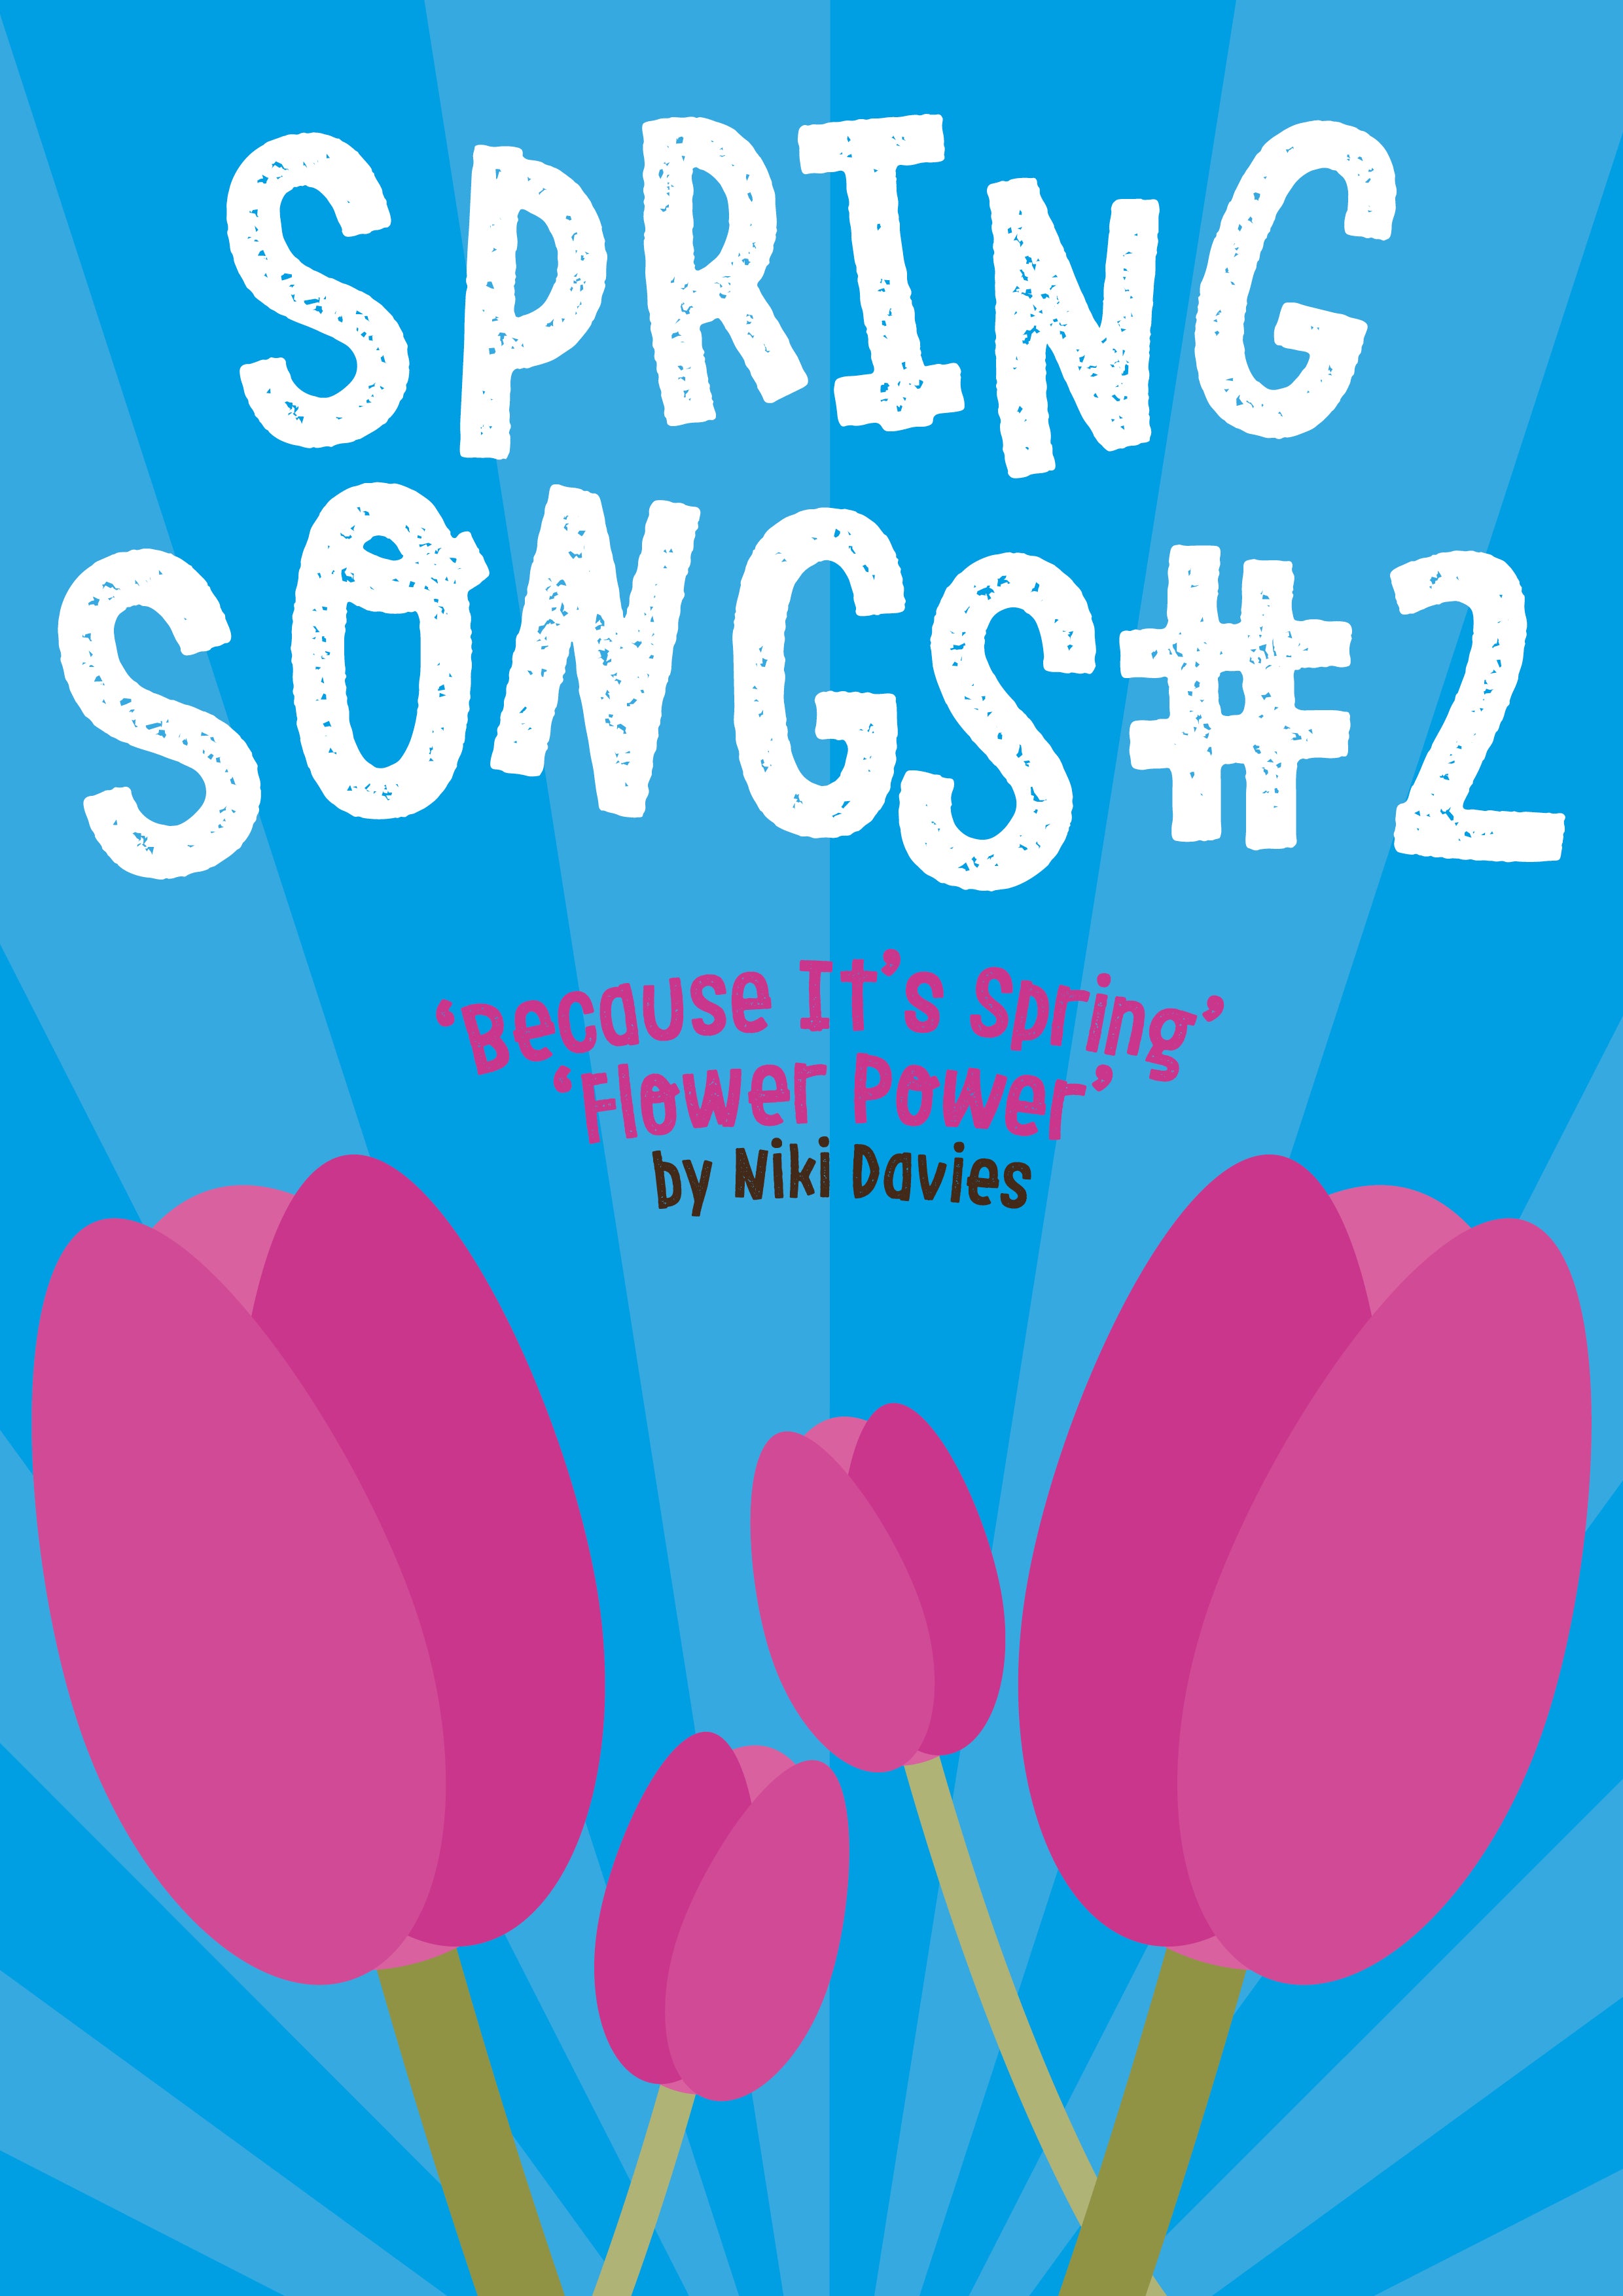 Spring Songs #2 Download Pack - 100% Discount With Code SPRING200